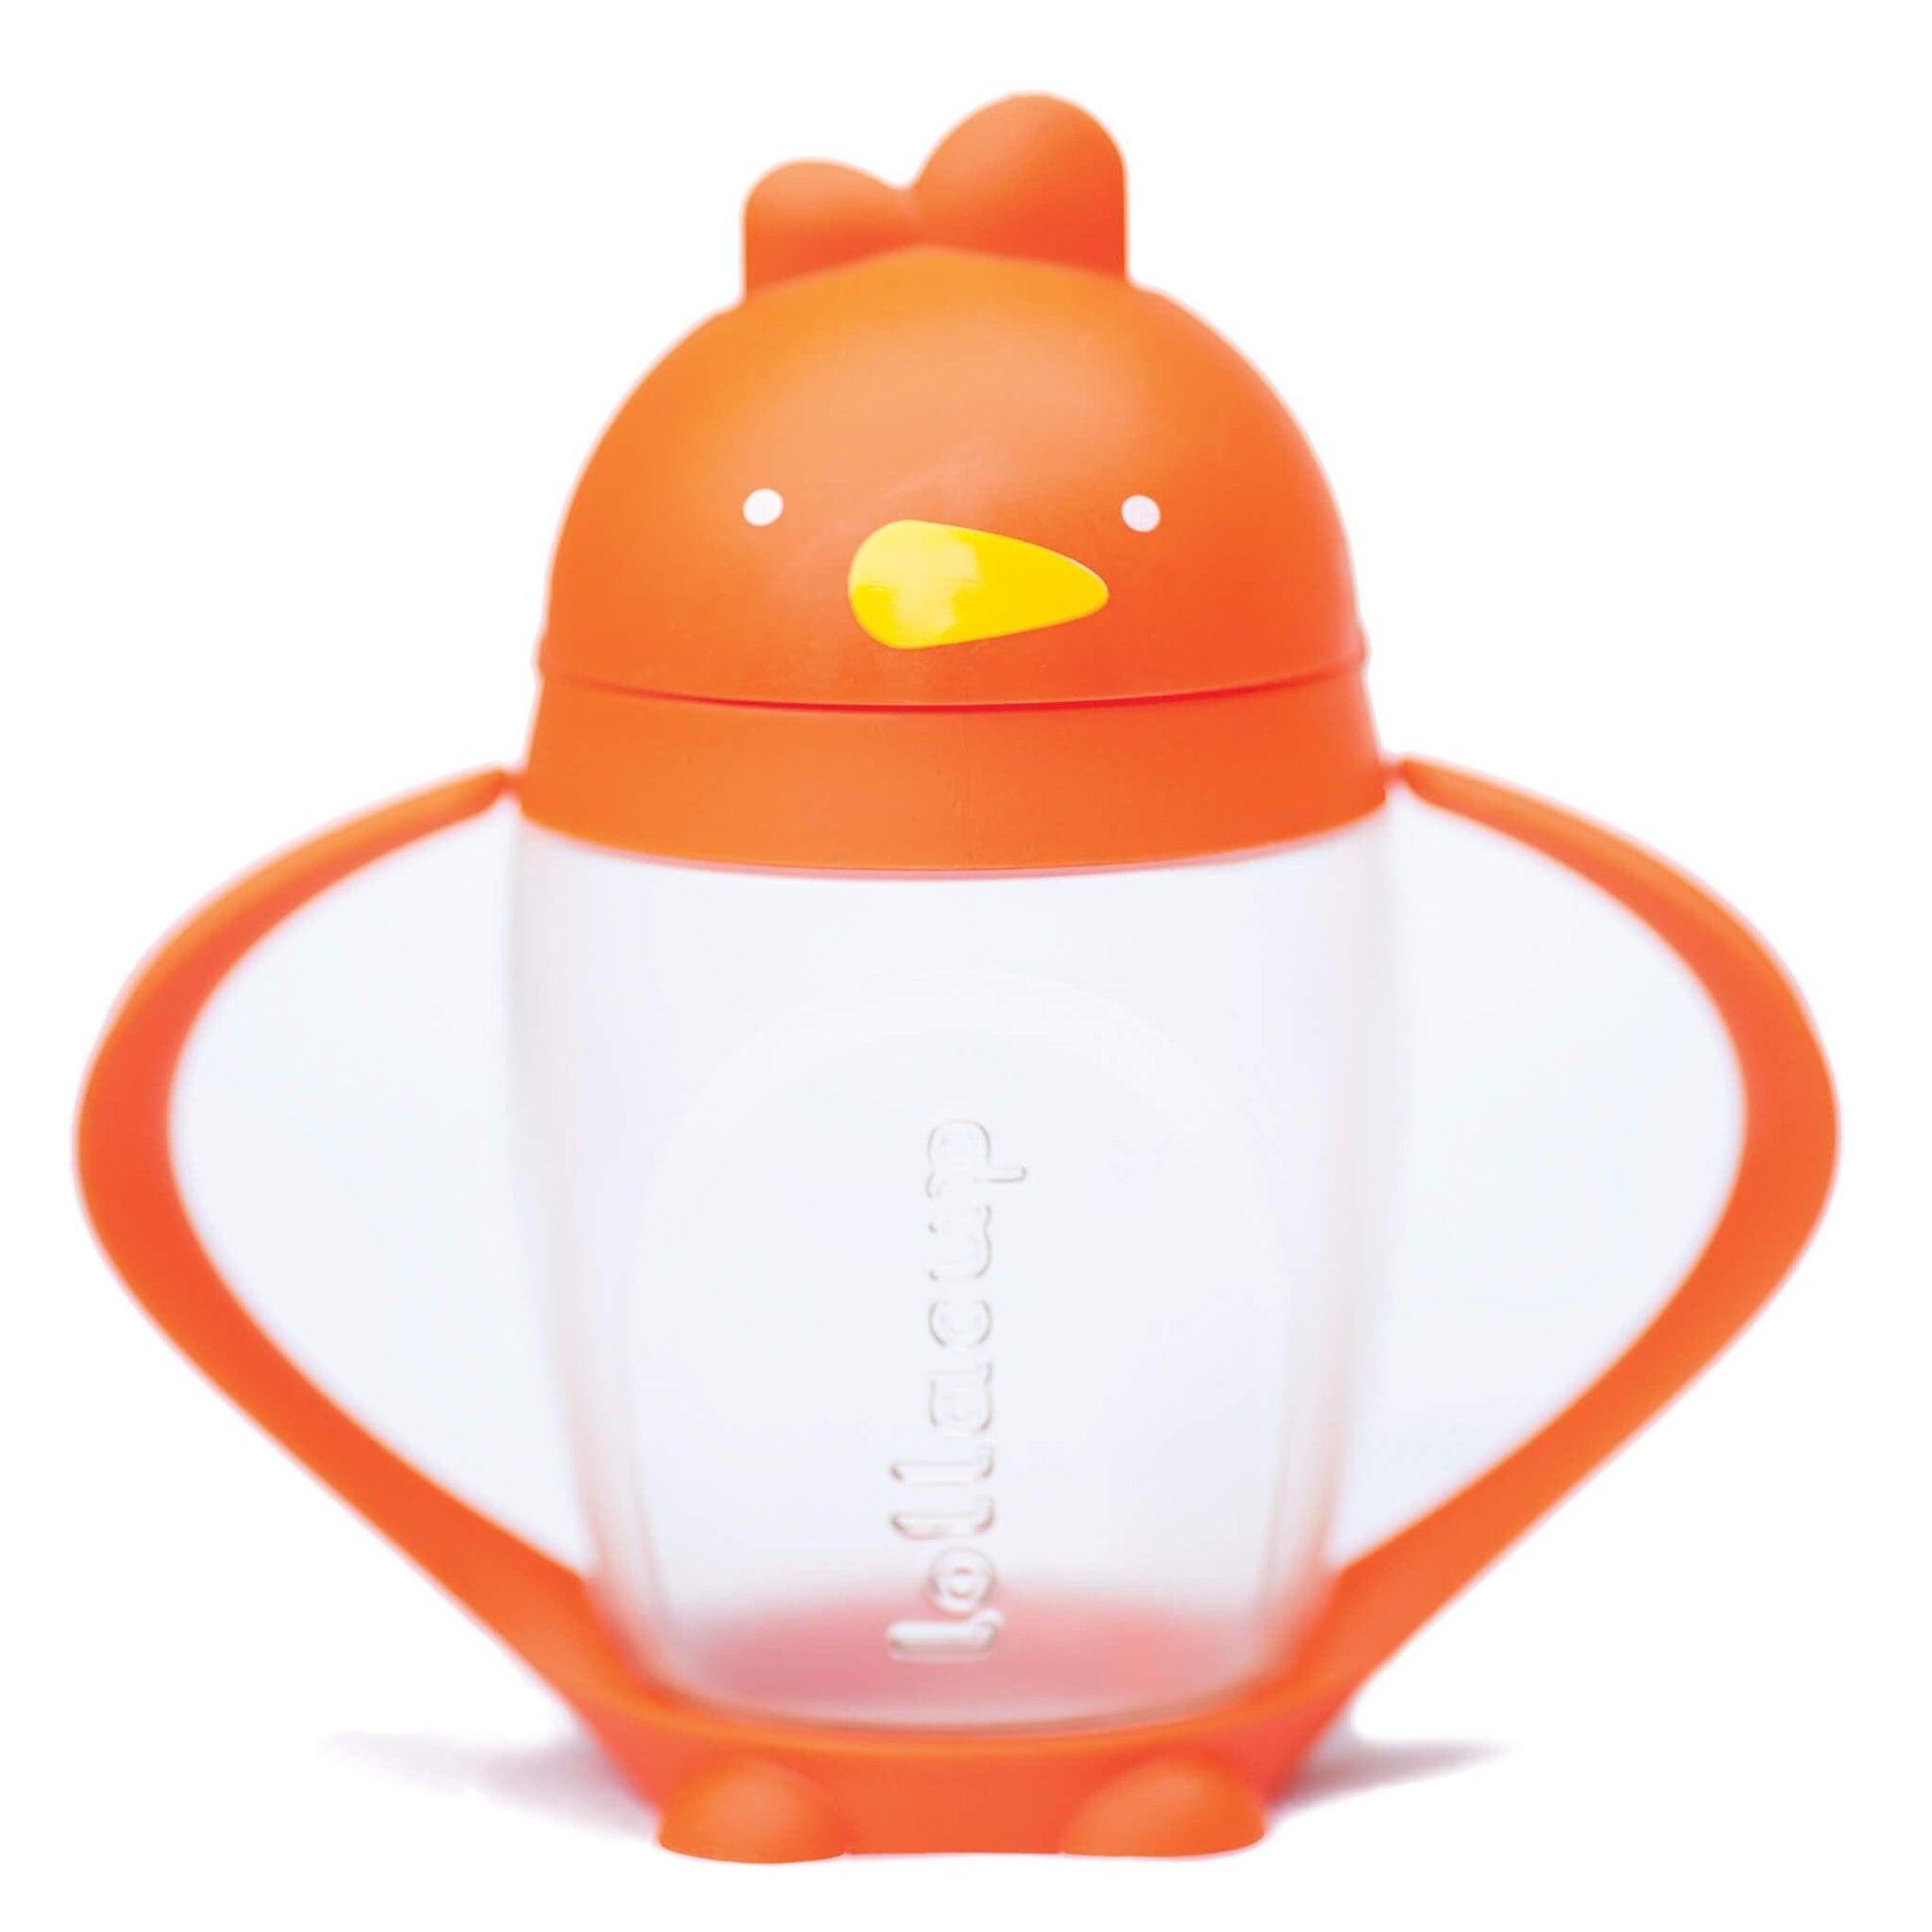 Lollaland Lollacup Infant & Toddler Straw Cup - Orange - Traveling Tikes 